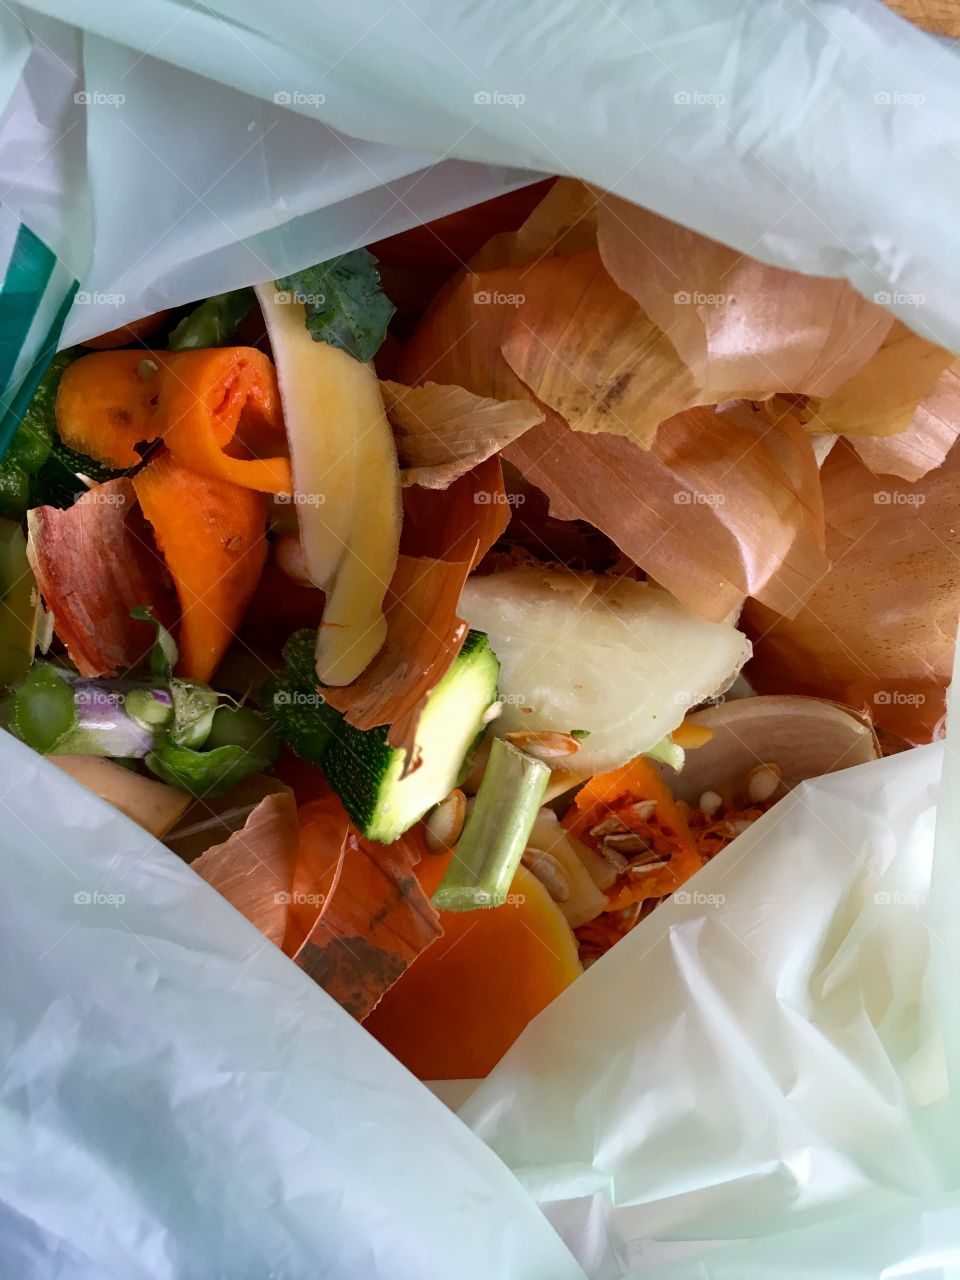 Food off cuts in food recycling bag after preparing dinner